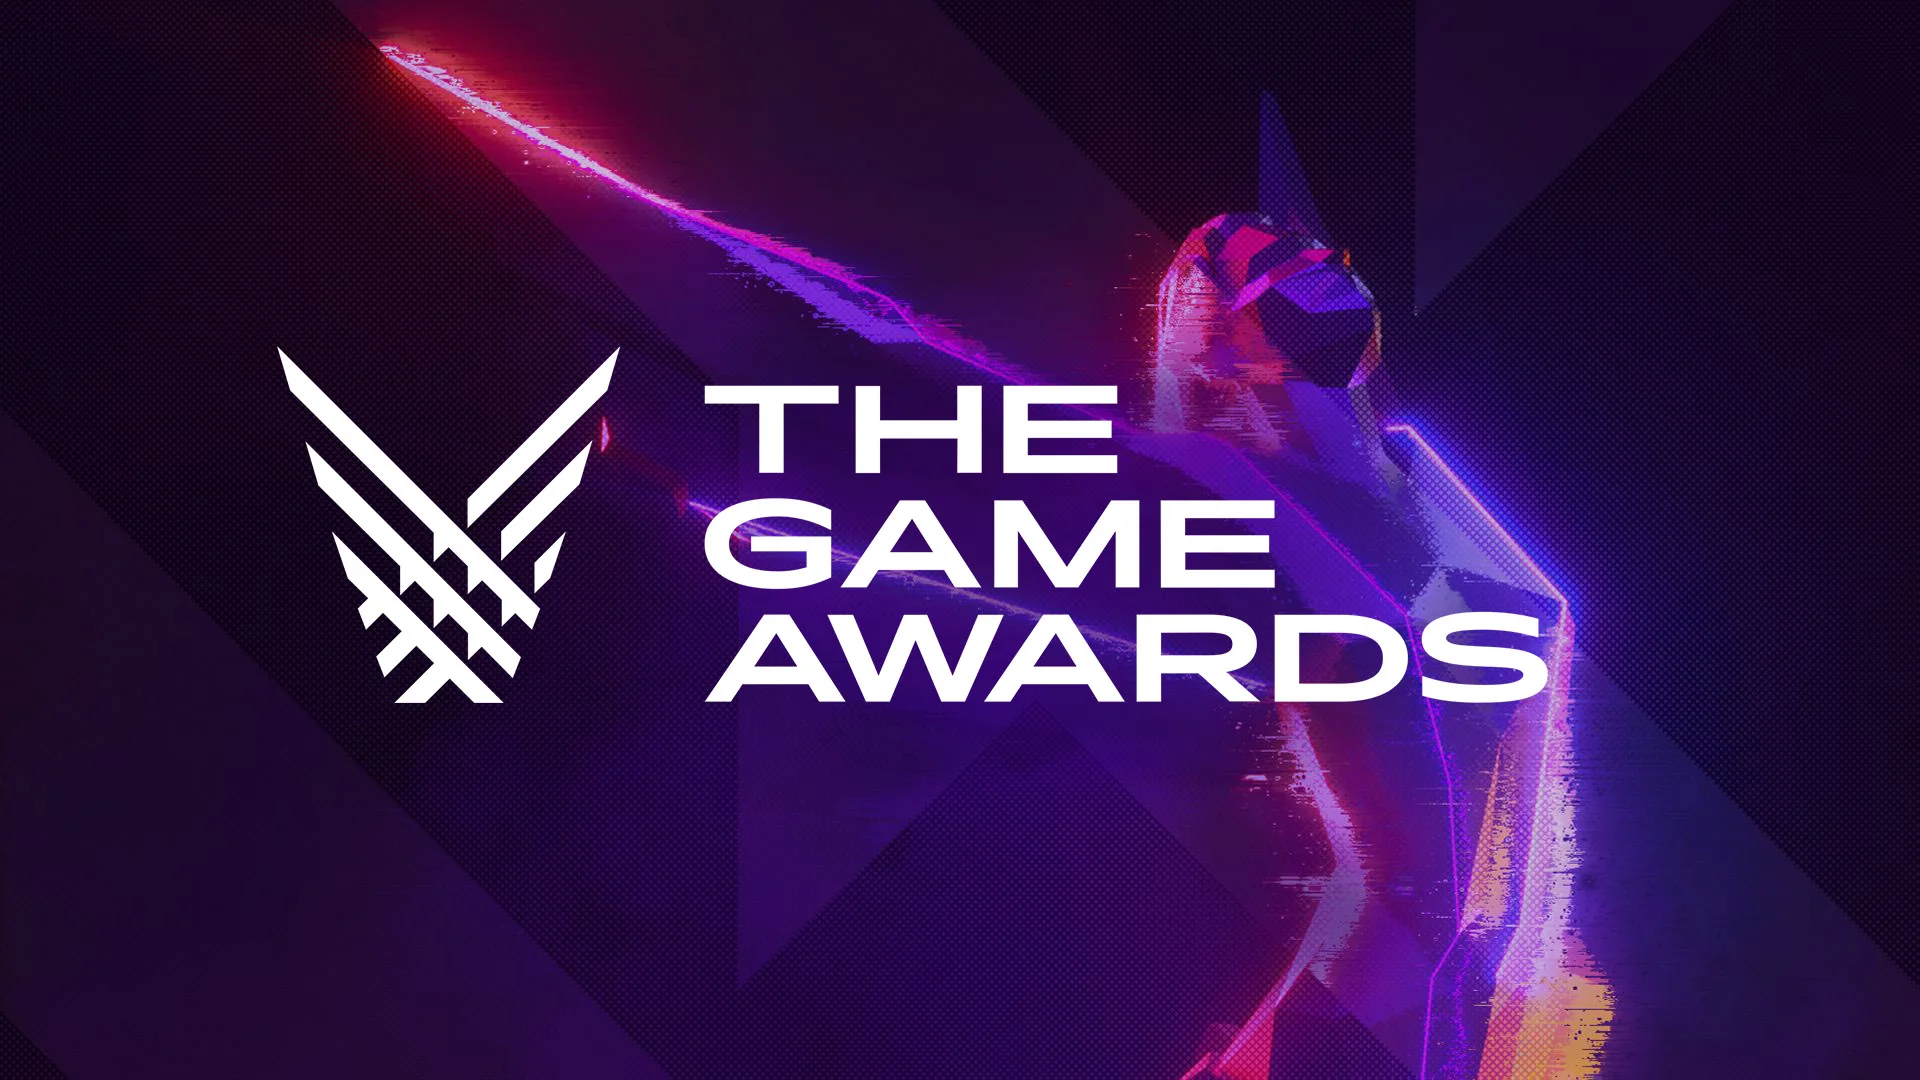 The contenders for victory in The Games Awards 2023 according to the players have been determined